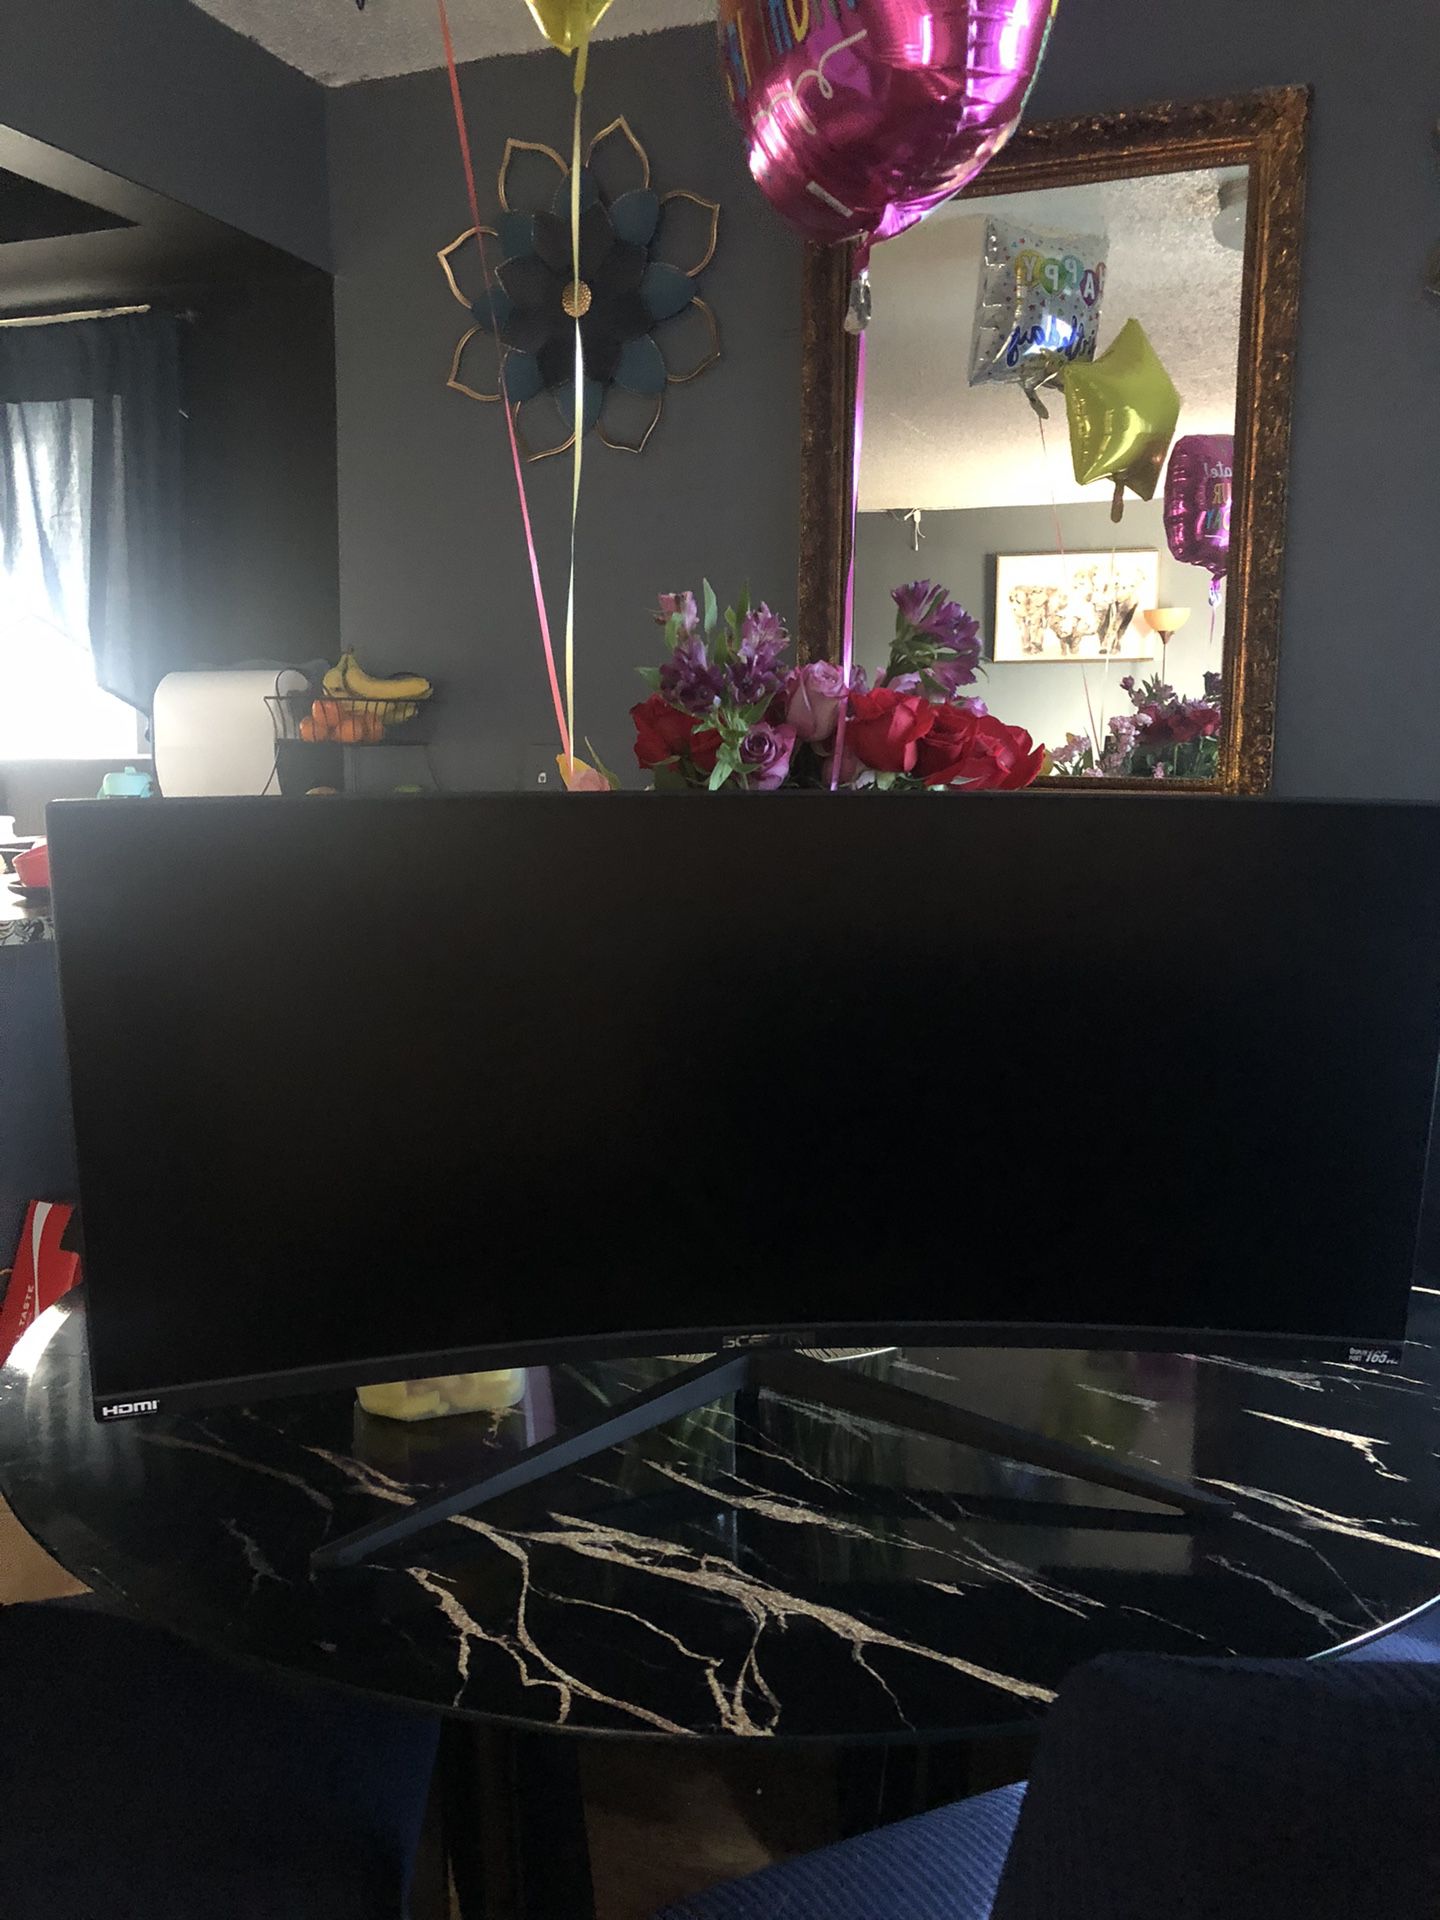 Sceptre 34-Inch Curved Ultrawide WQHD Monitor 3440 x 1440 R1500 up to 165Hz DisplayPort x2 99% sRGB 1ms Picture by Picture, Machine Black 2023